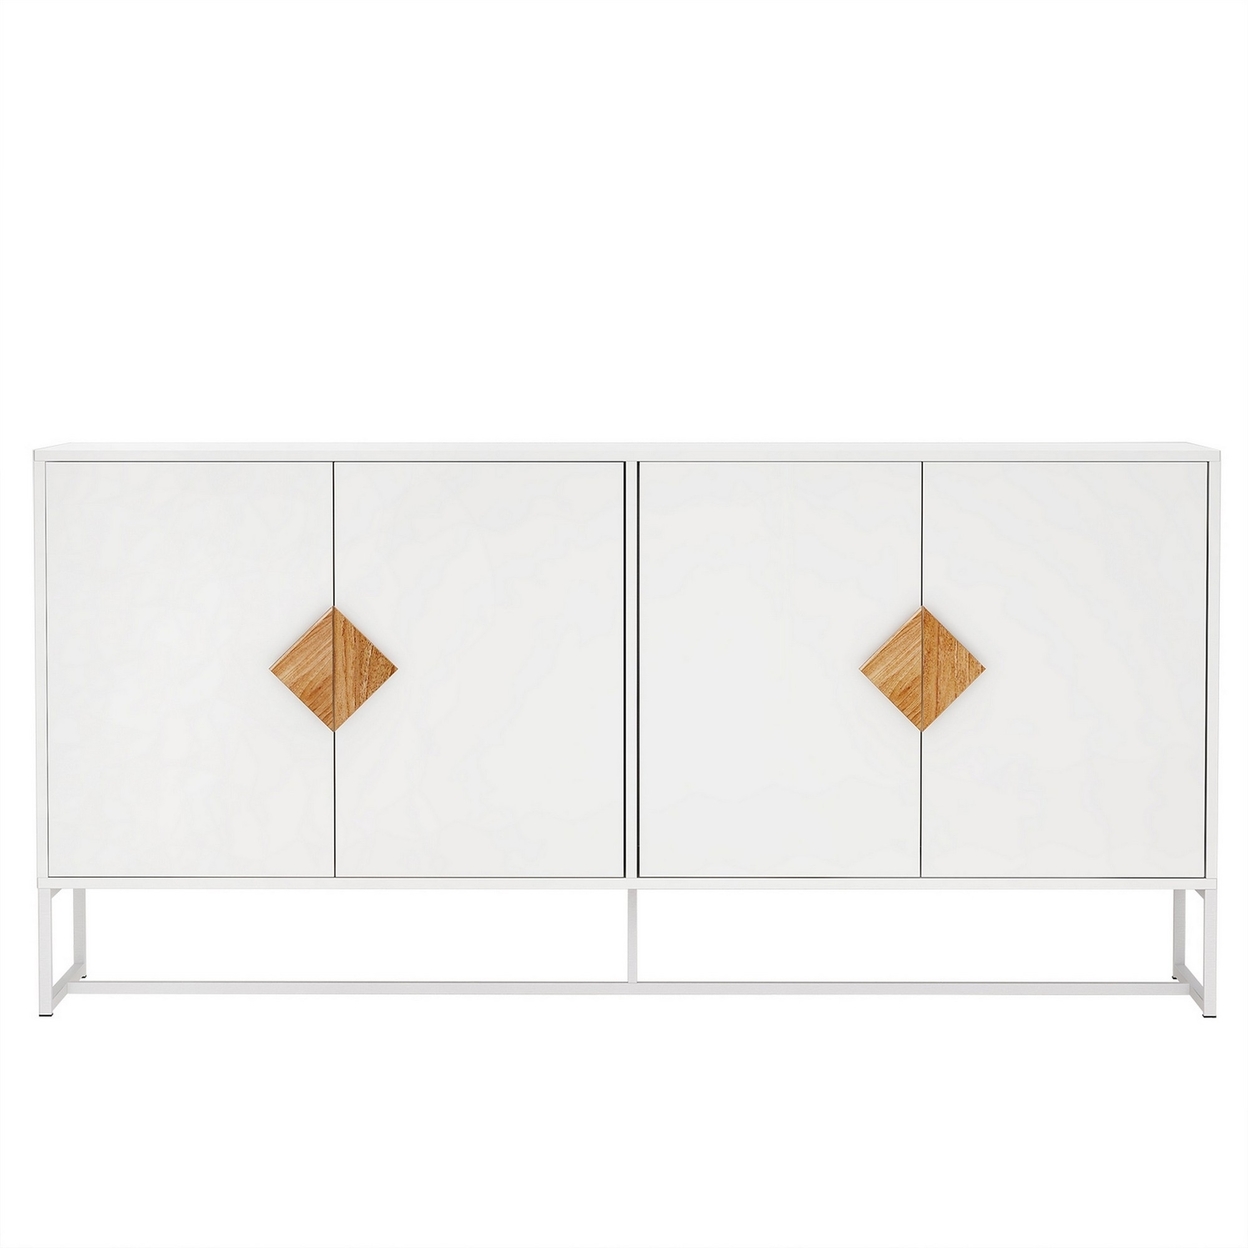 63 Inch Sideboard With 2 Double Door Cabinets, Square Handles, White Wood- Saltoro Sherpi